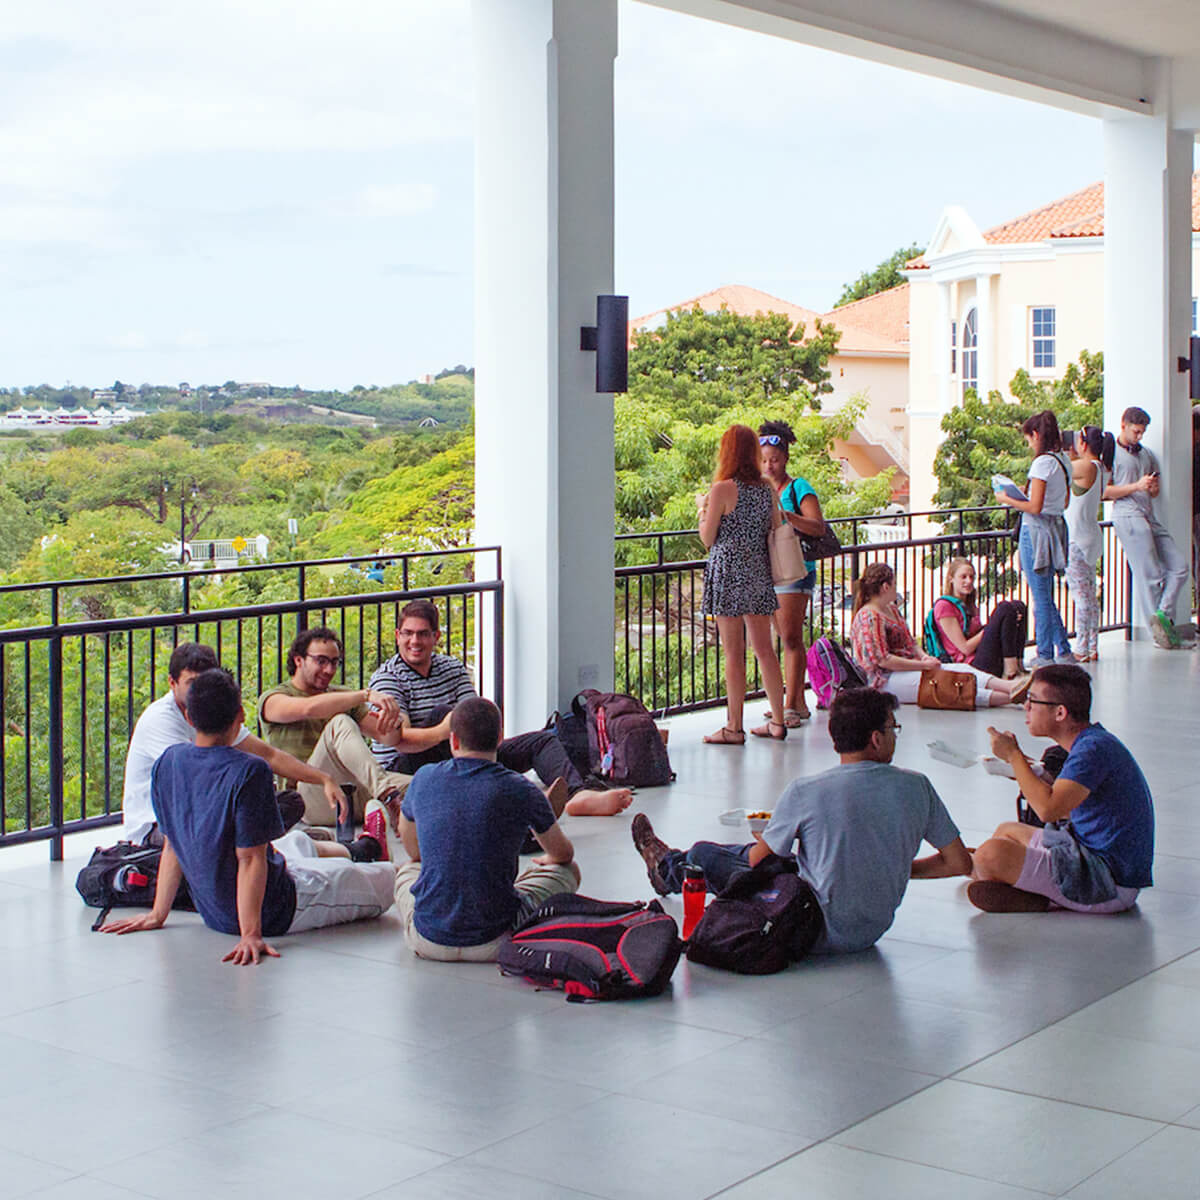 These photos are all focused on the alumni, students, and campus life in Grenada.